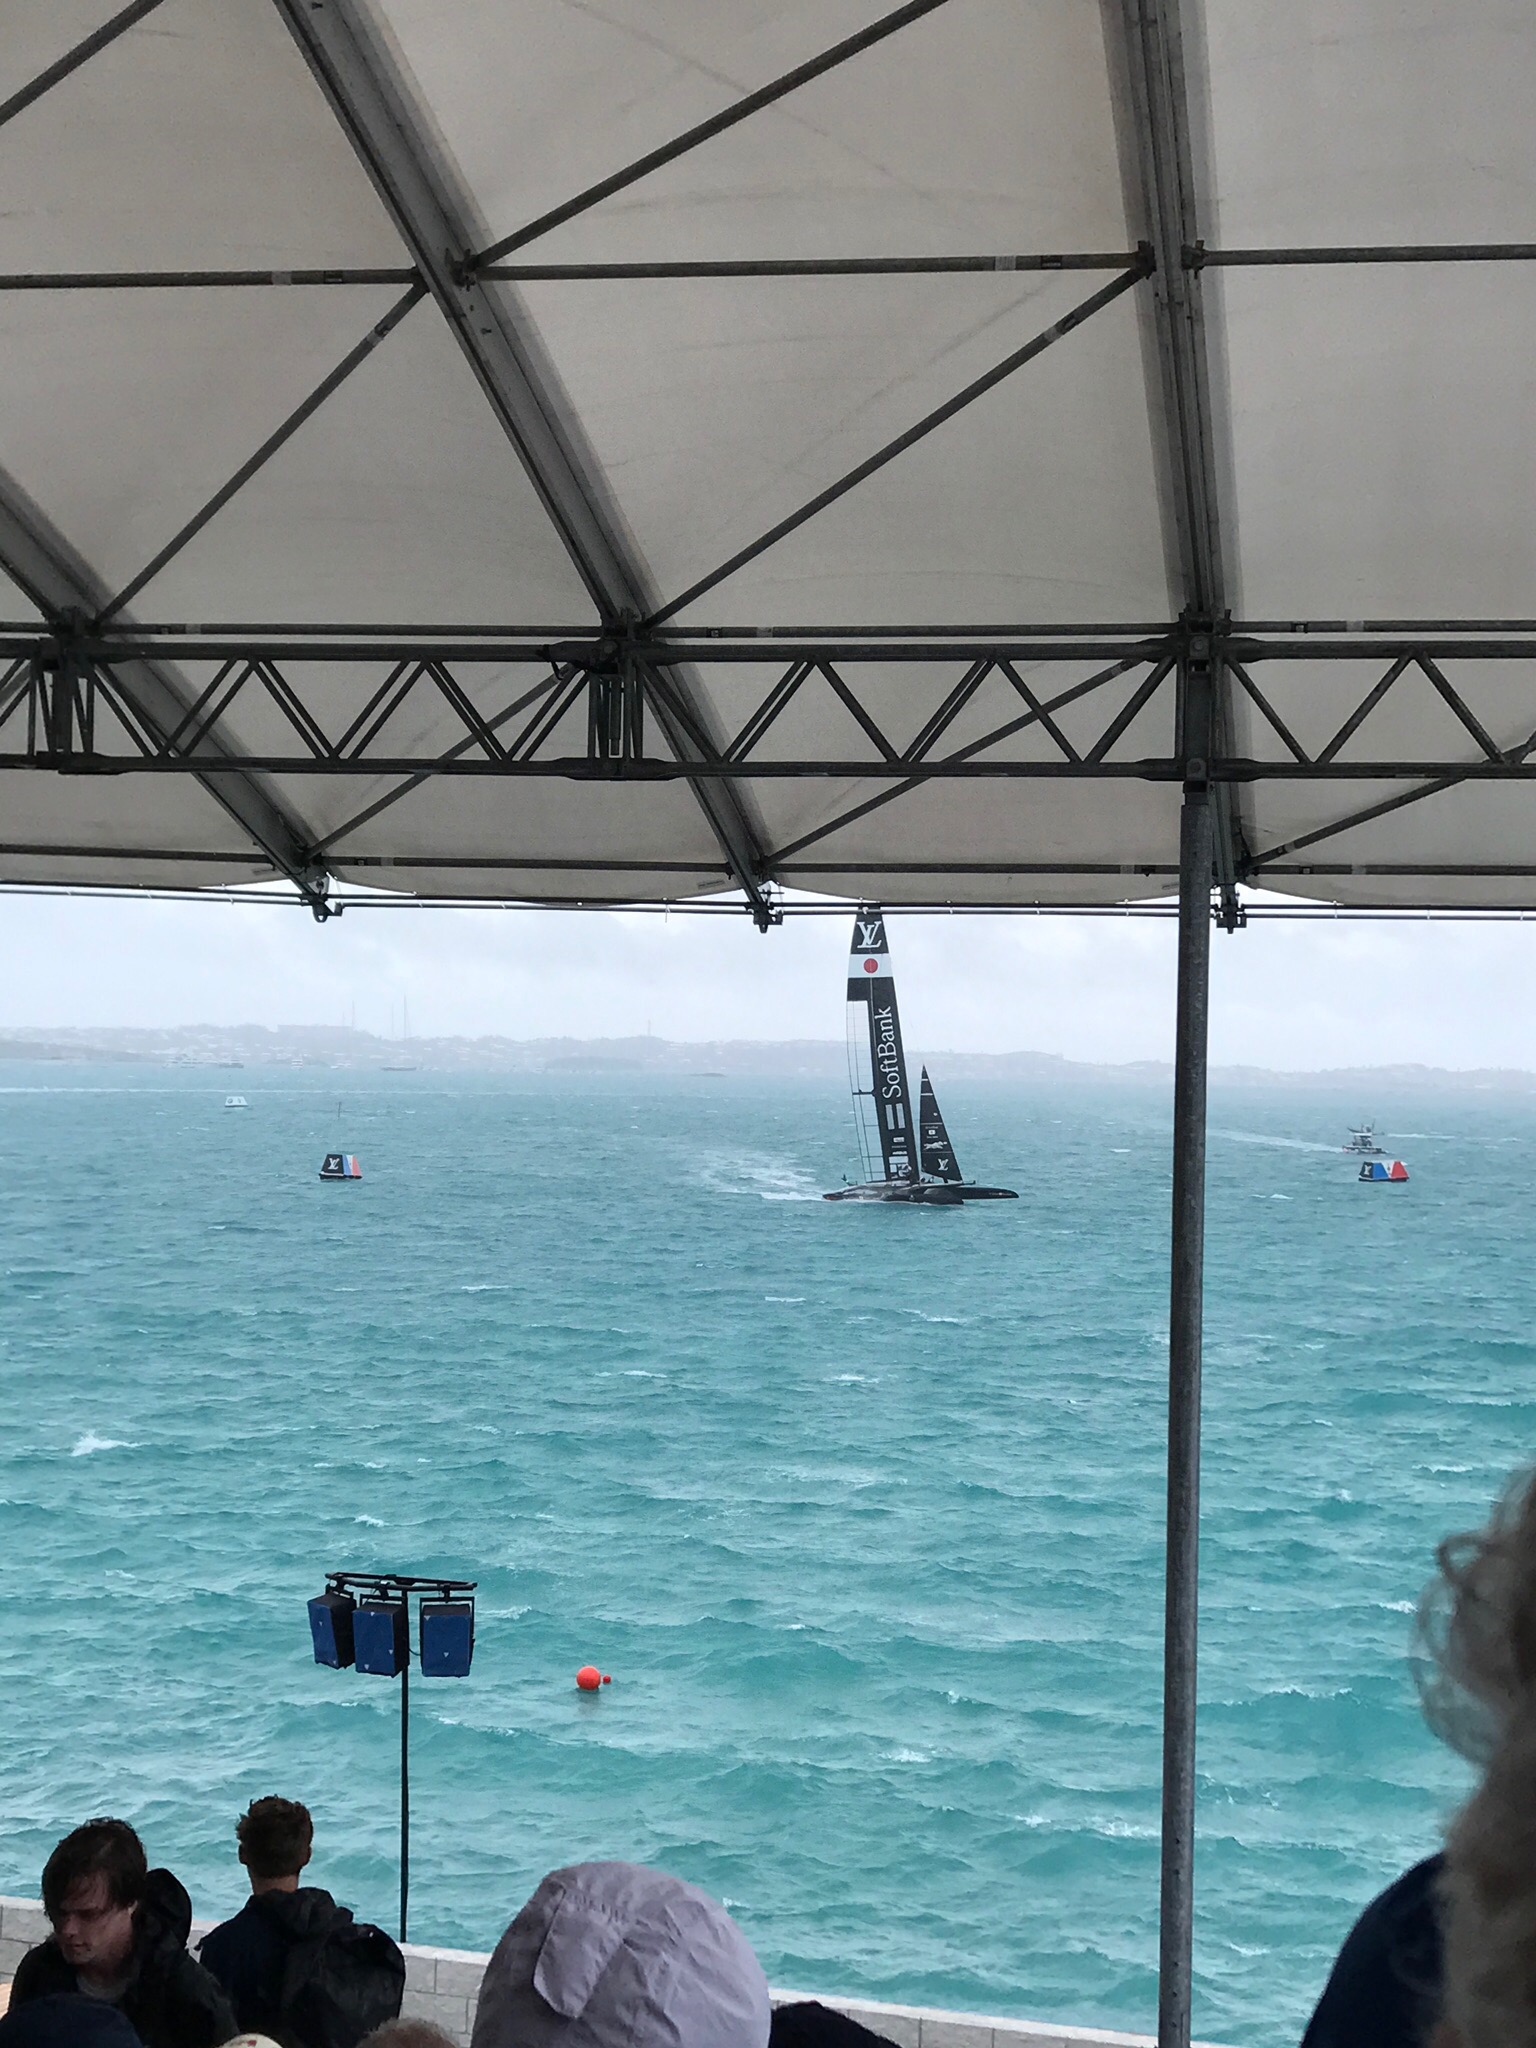 America's Cup Bermuda Grand Stand Seating View